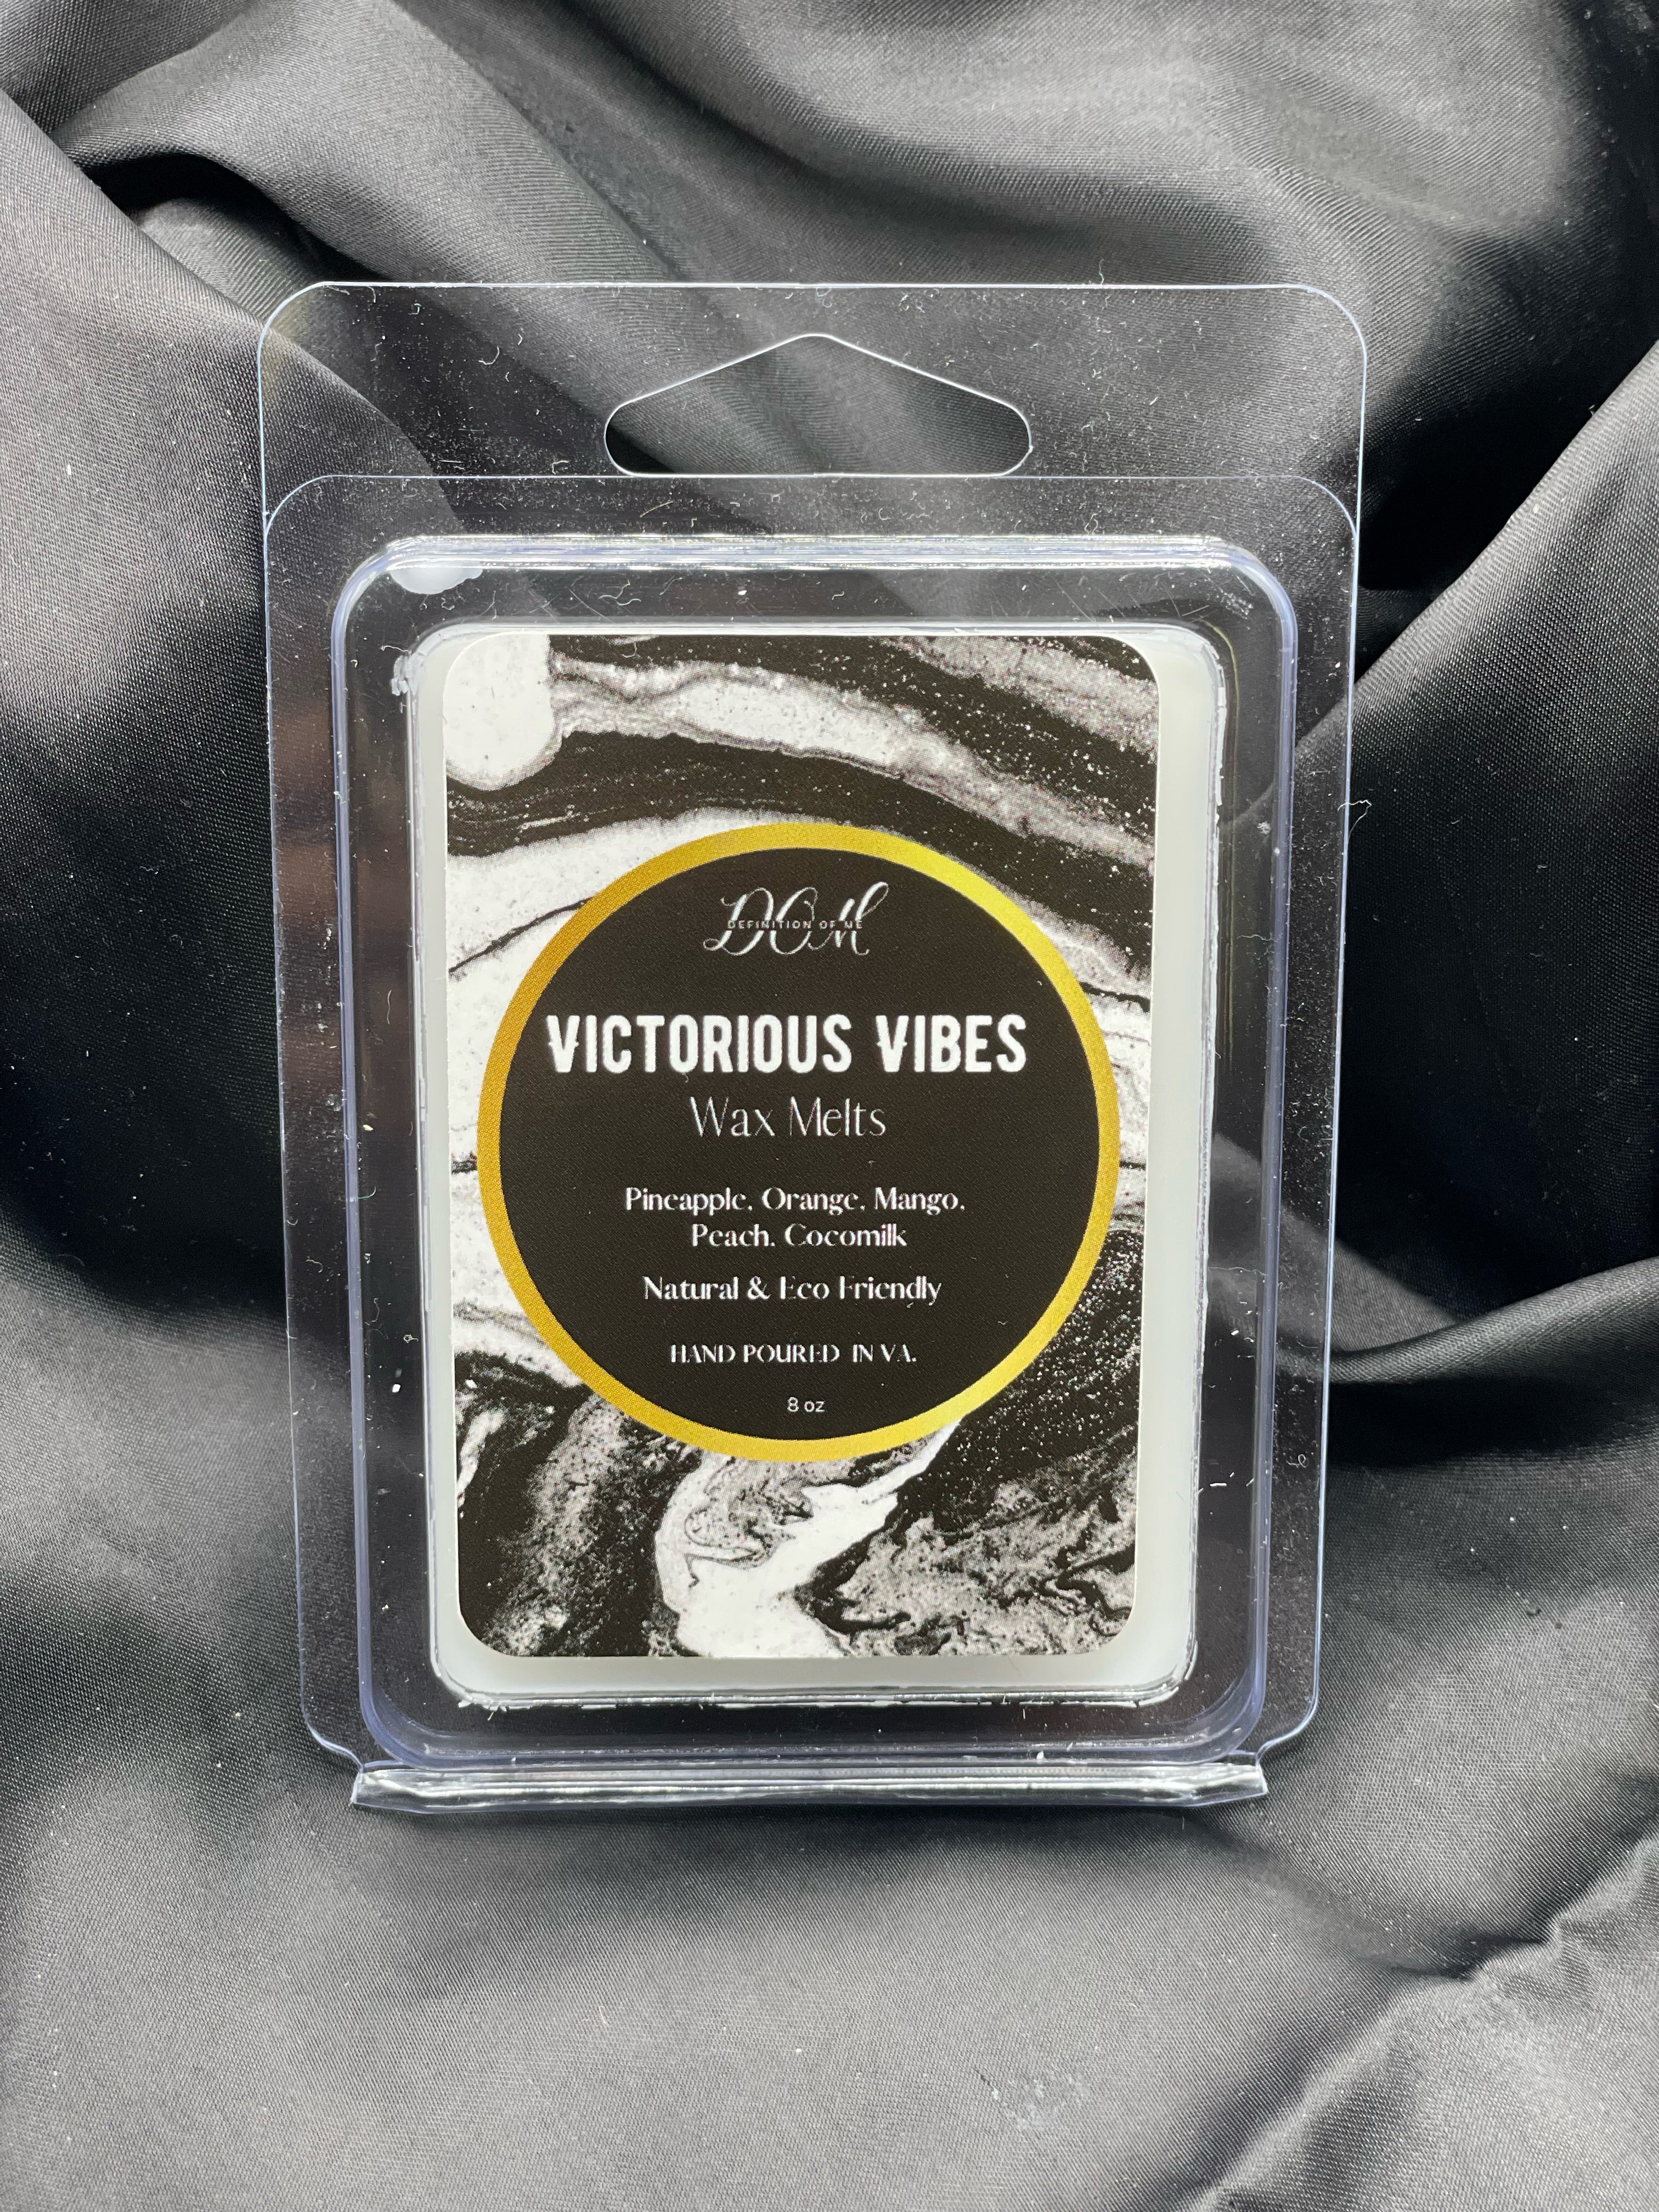 Wax melts: Victorious Vibes